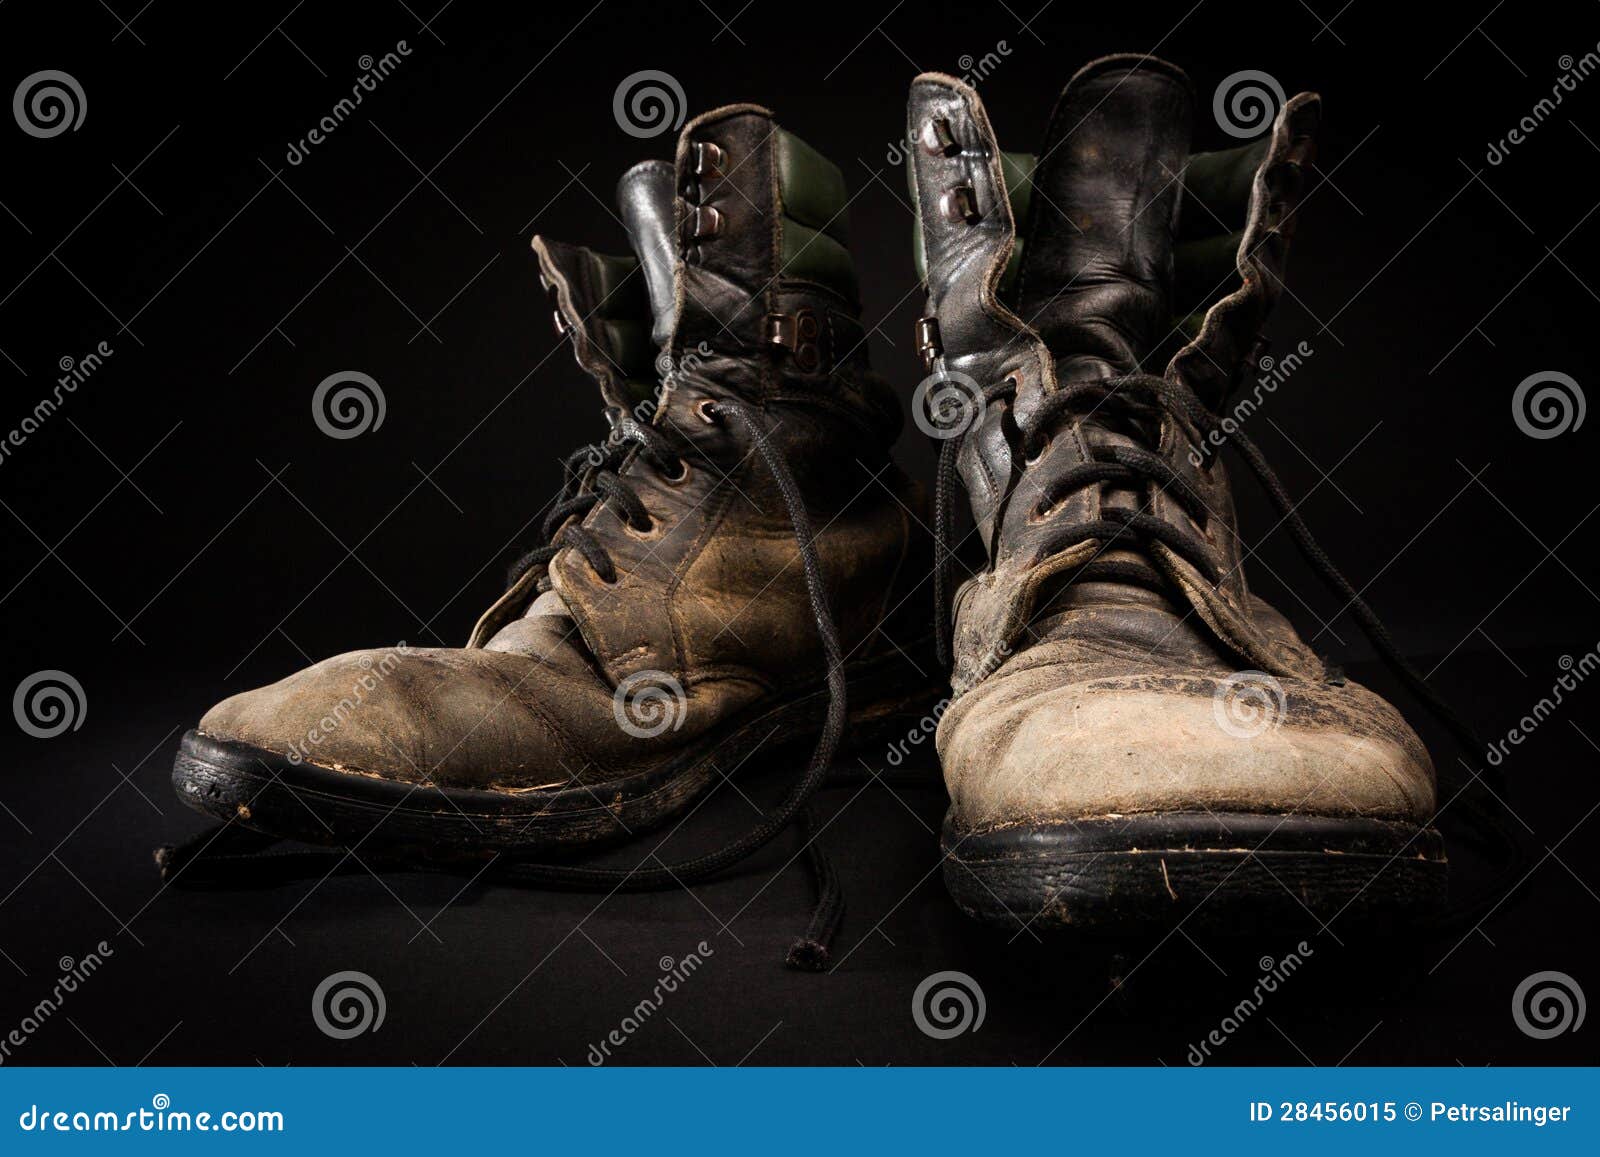 Old army boots stock image. Image of heavy, boots, muddy - 28456015